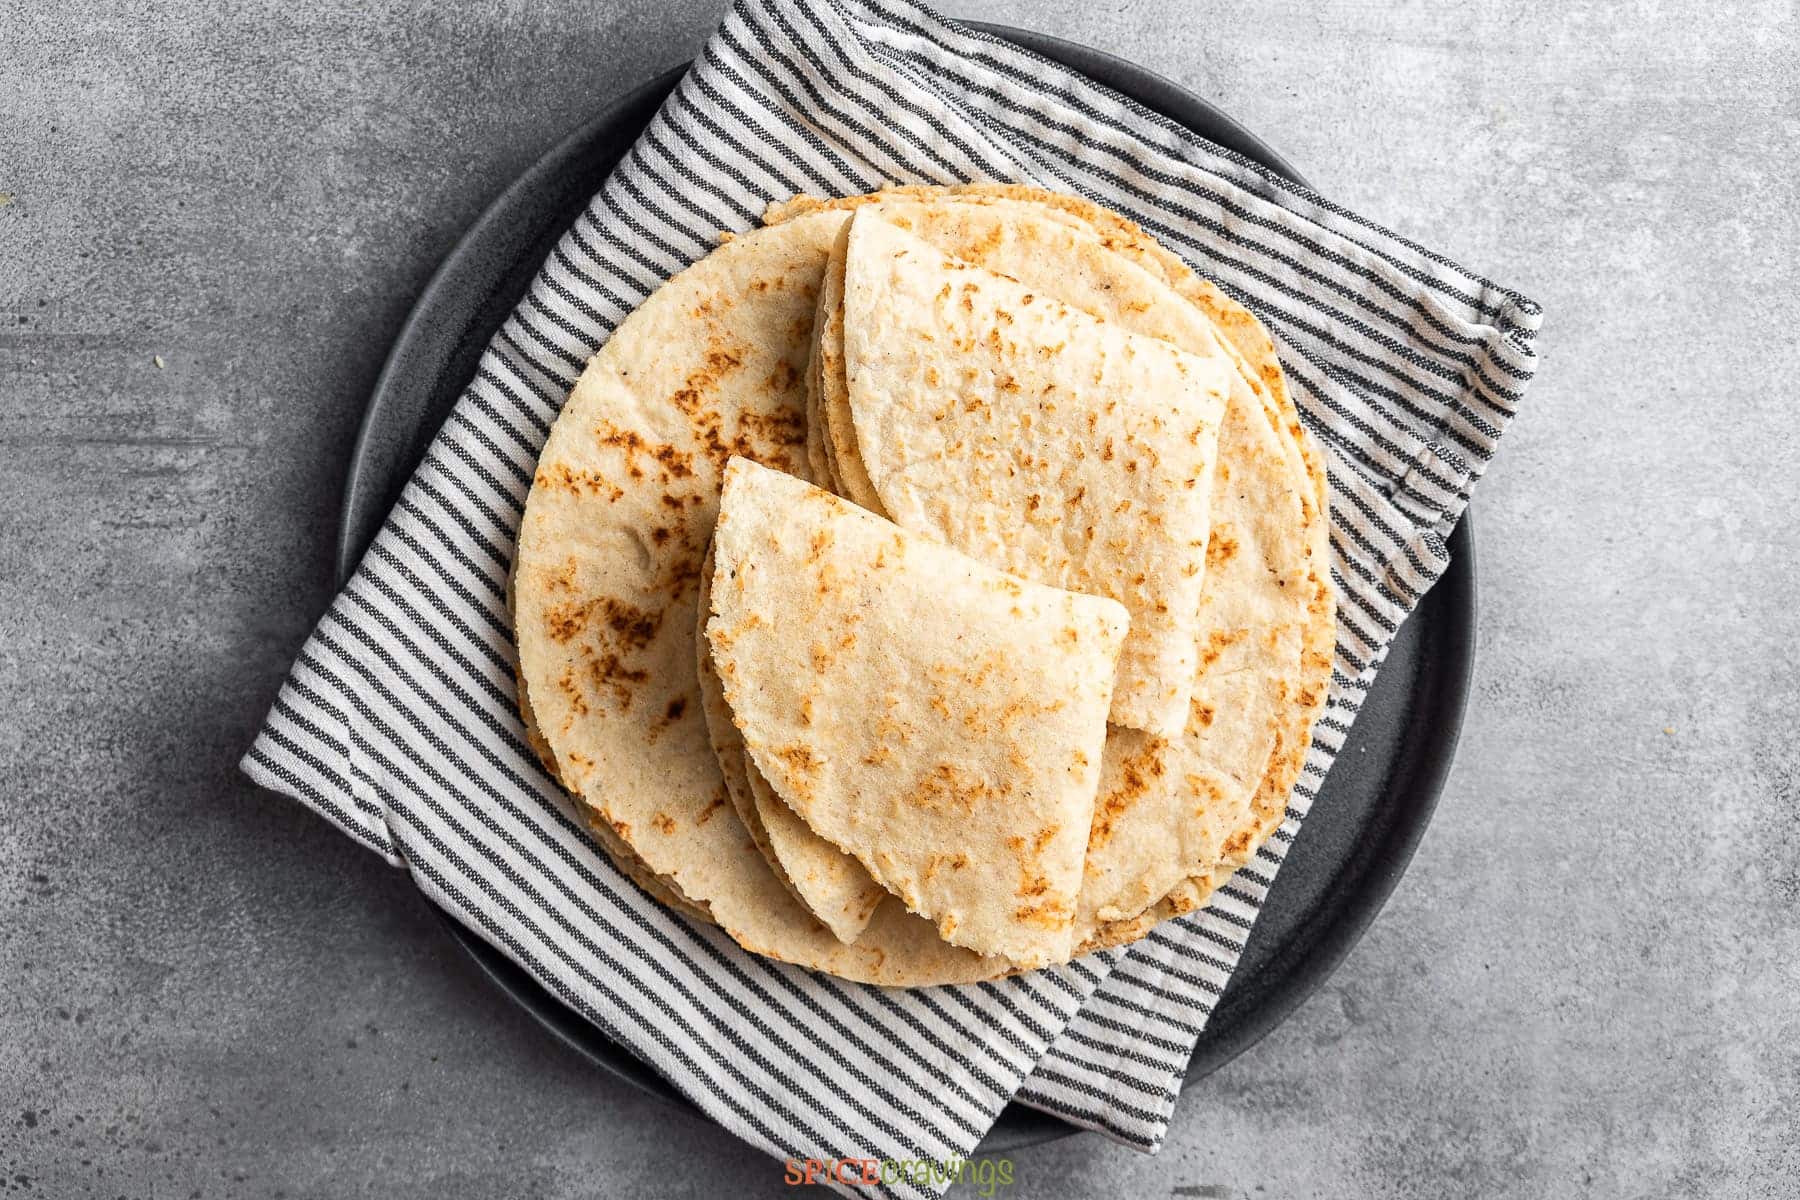 Coconut Flour Roti Calories: How Does This Chapati Work For Weight Loss?